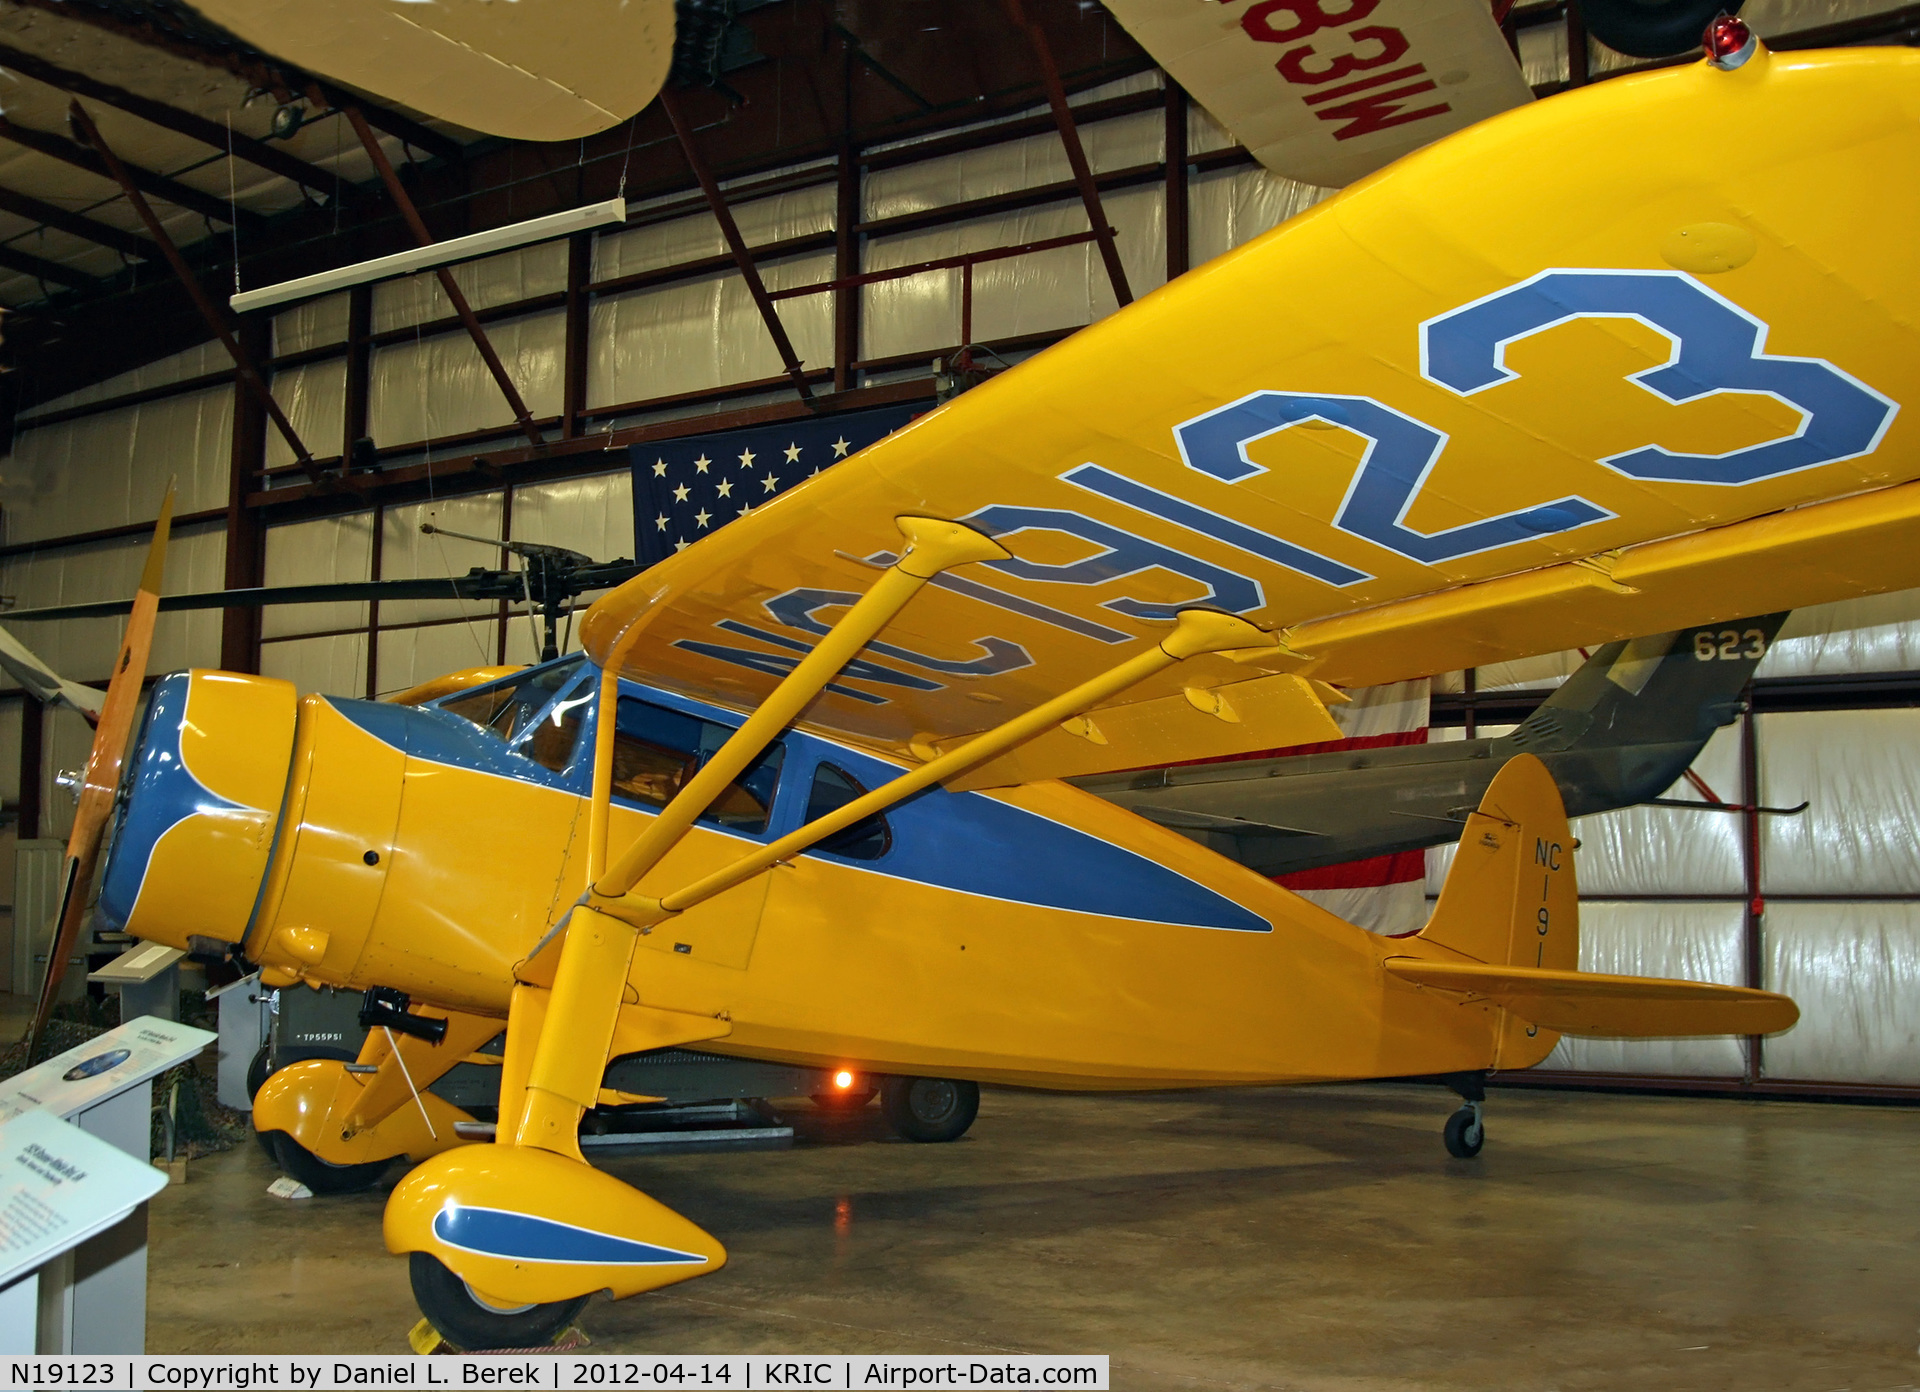 N19123, 1937 Fairchild 24 G C/N 2983, Classic Fairchild at the Virginia Aviation Museum, among other Golden Age treasures.